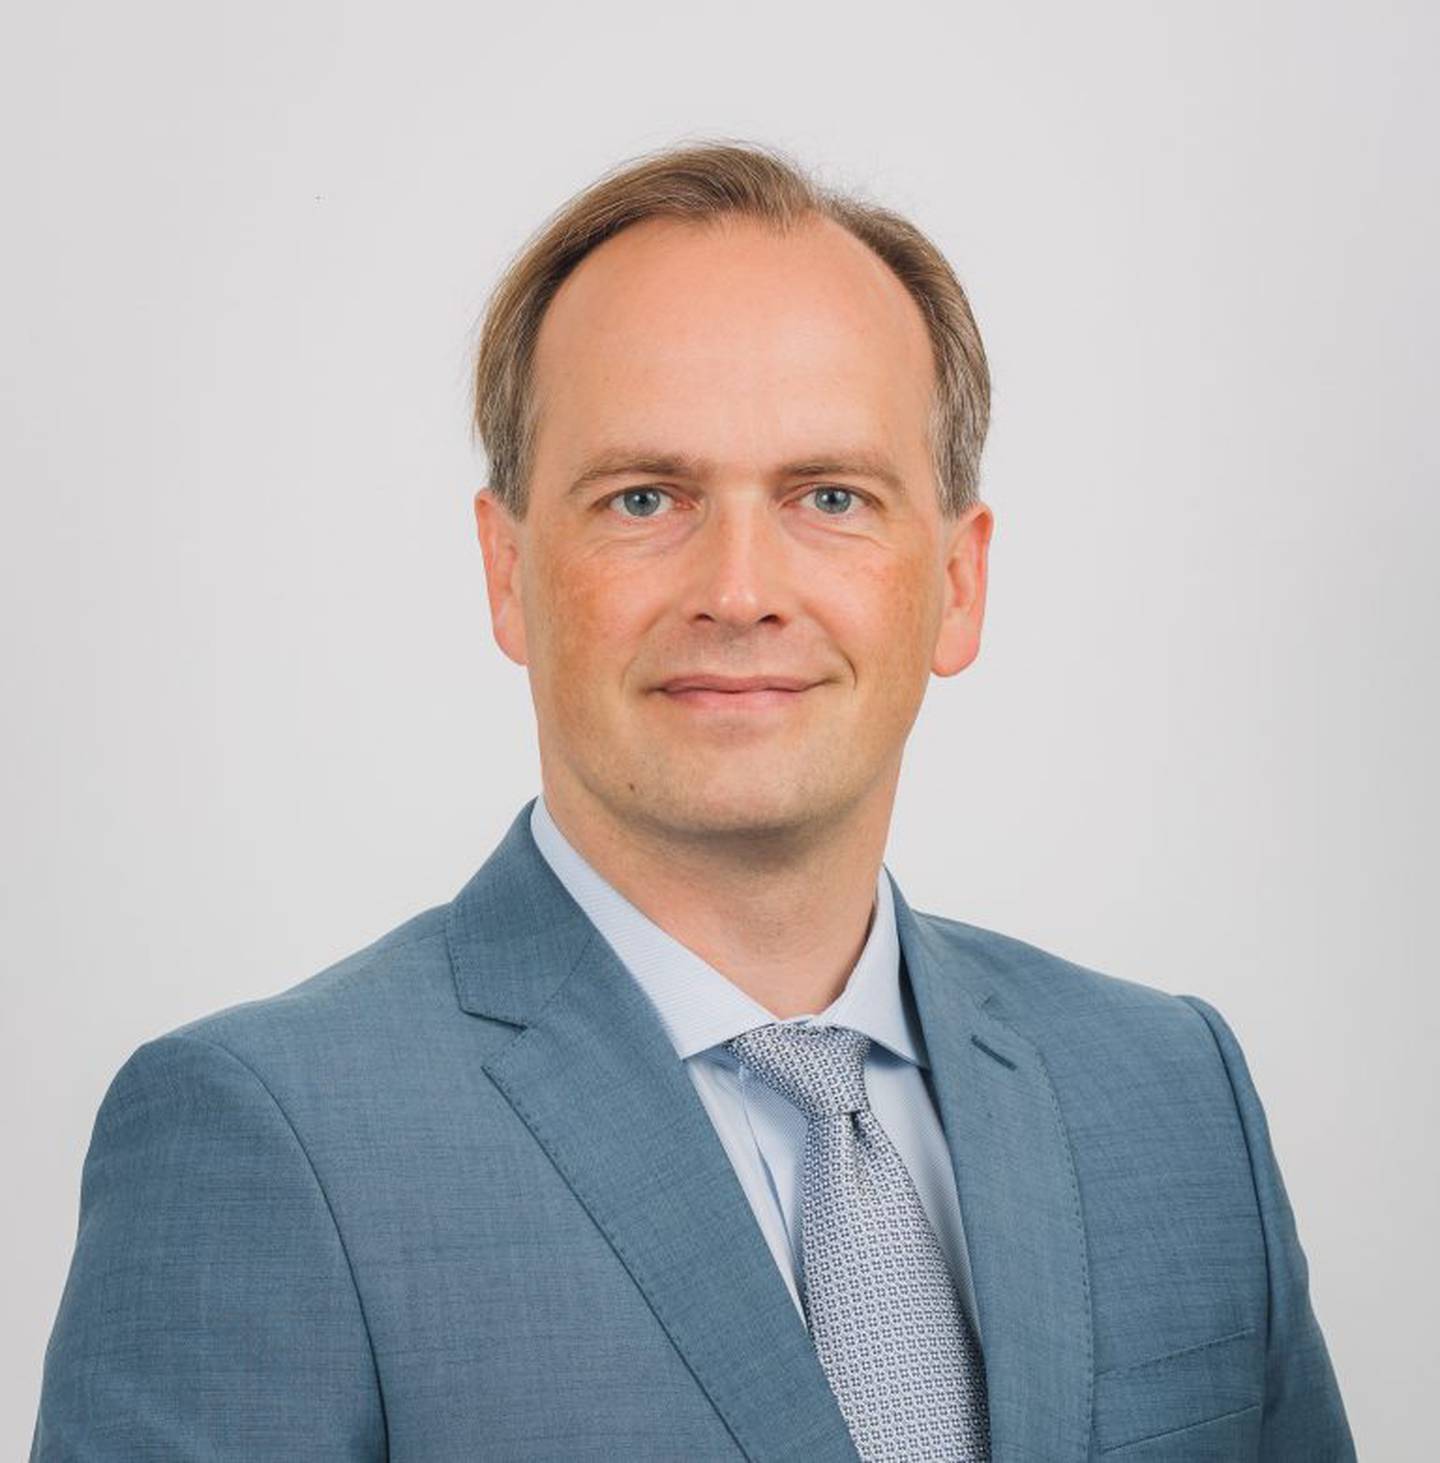 Mart Noorma became director of the NATO Cooperative Cyber Defence Centre of Excellence in August 2022.